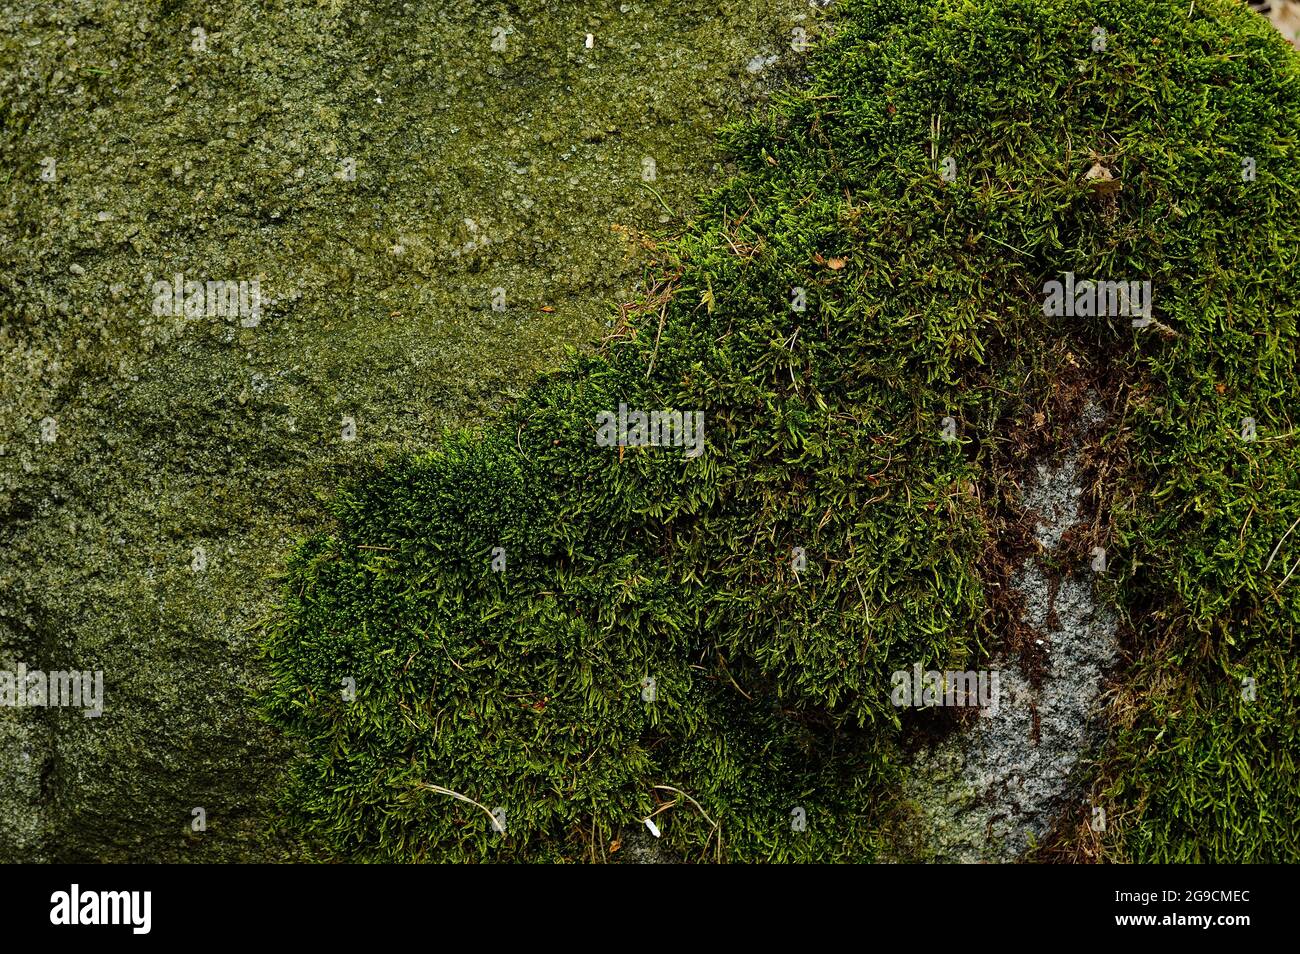 Mossy stone in the forest among old leaves. Summer. Stock Photo